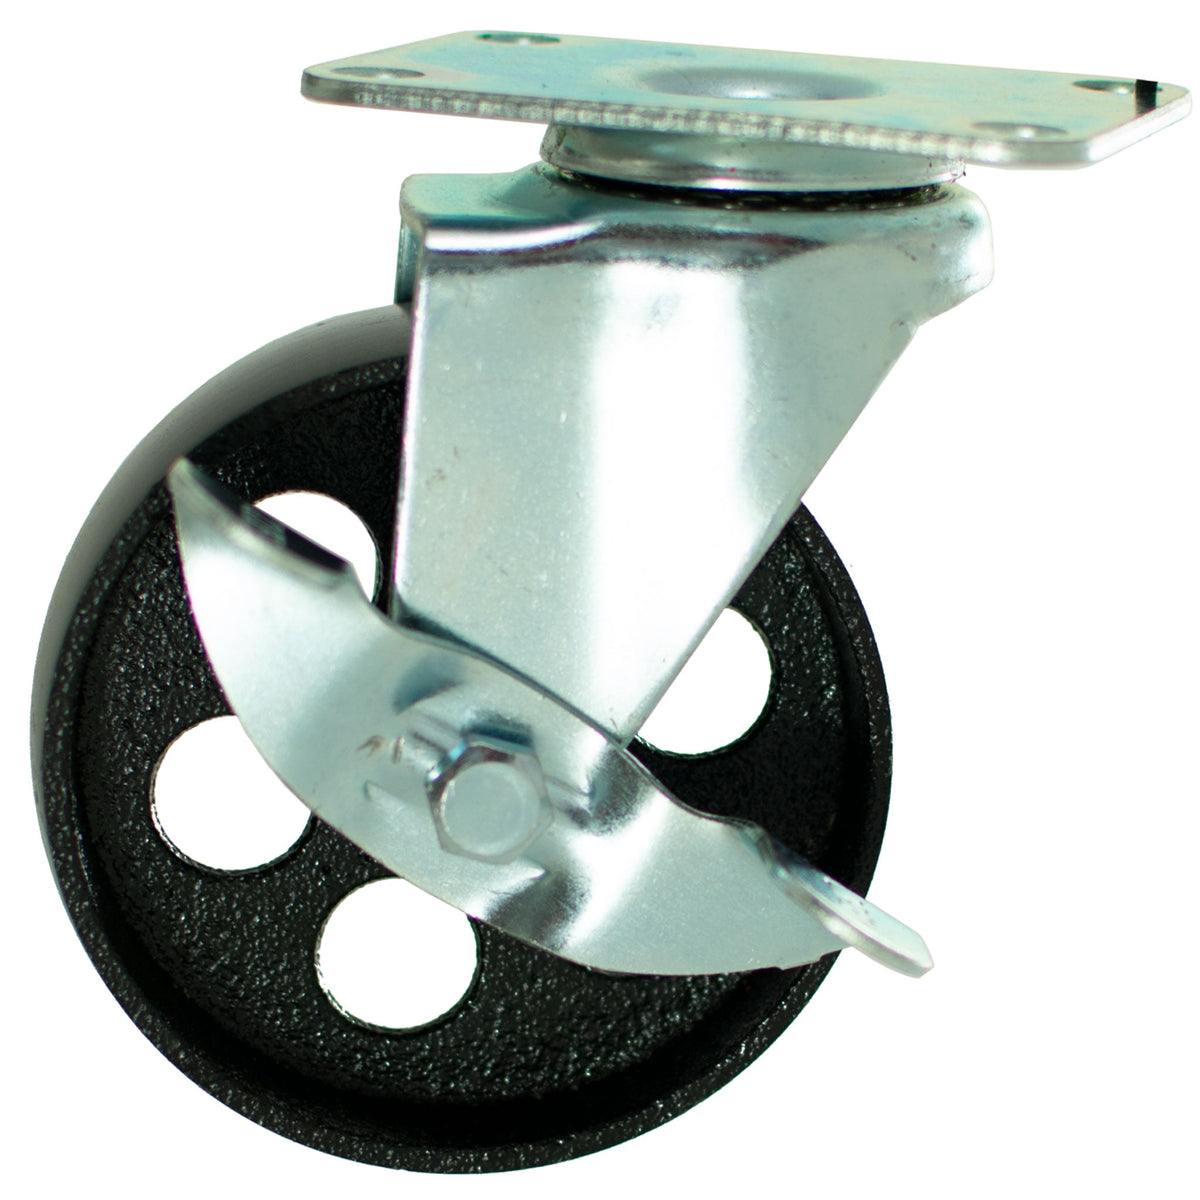 Now Selling Brand New 5in Galvanized Cast Iron Casters